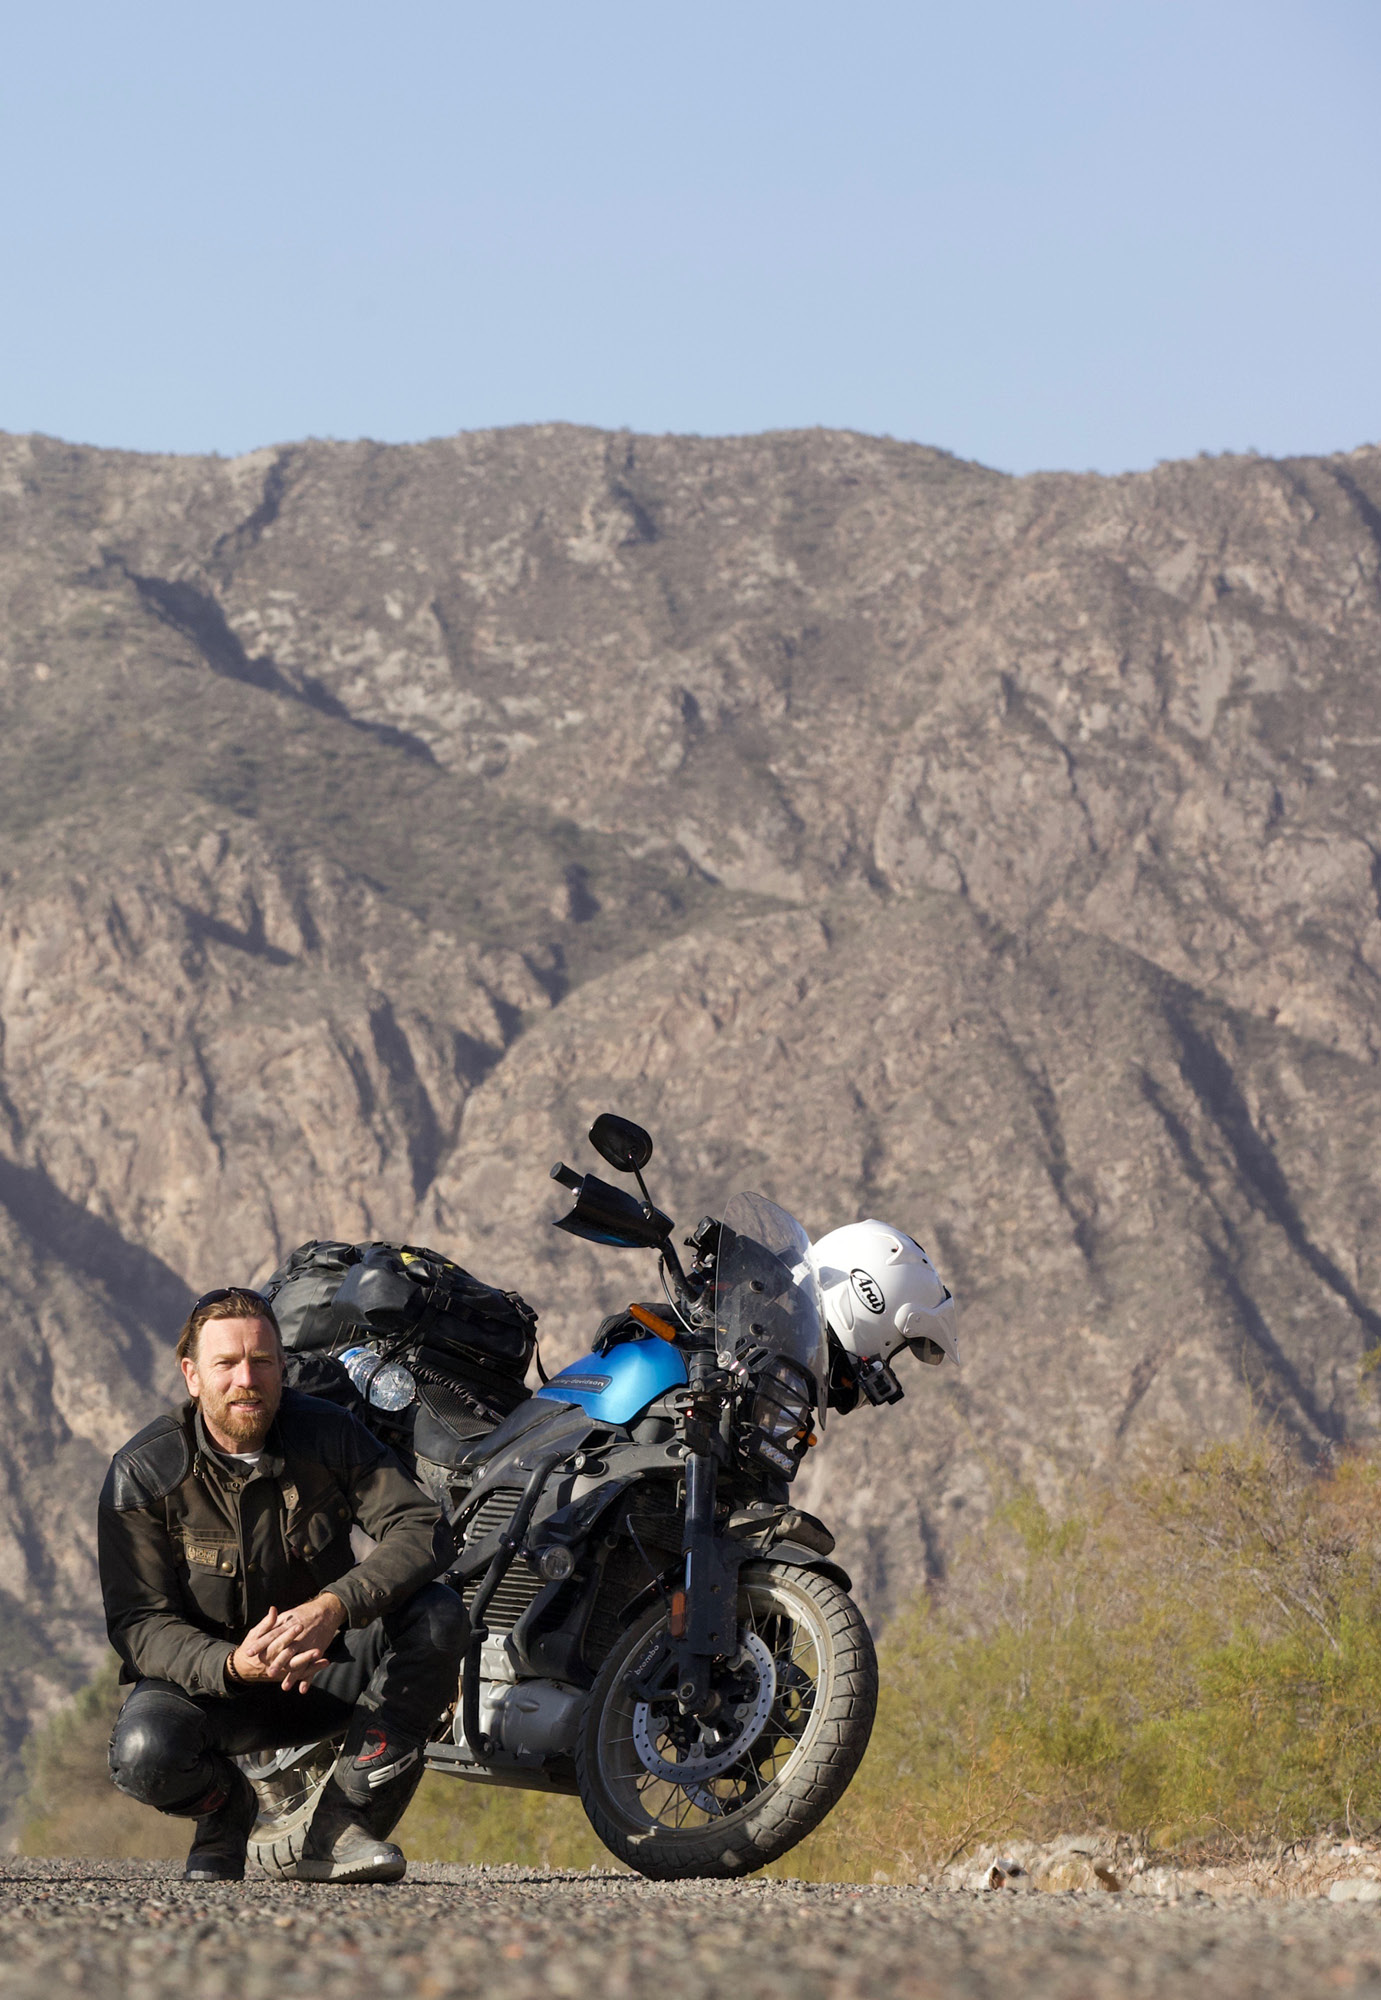 Ewan McGregor has set off on another adventure with Charley Boorman in The Long Way UpEwan McGregor has set off on another adventure with Charley Boorman in The Long Way Up